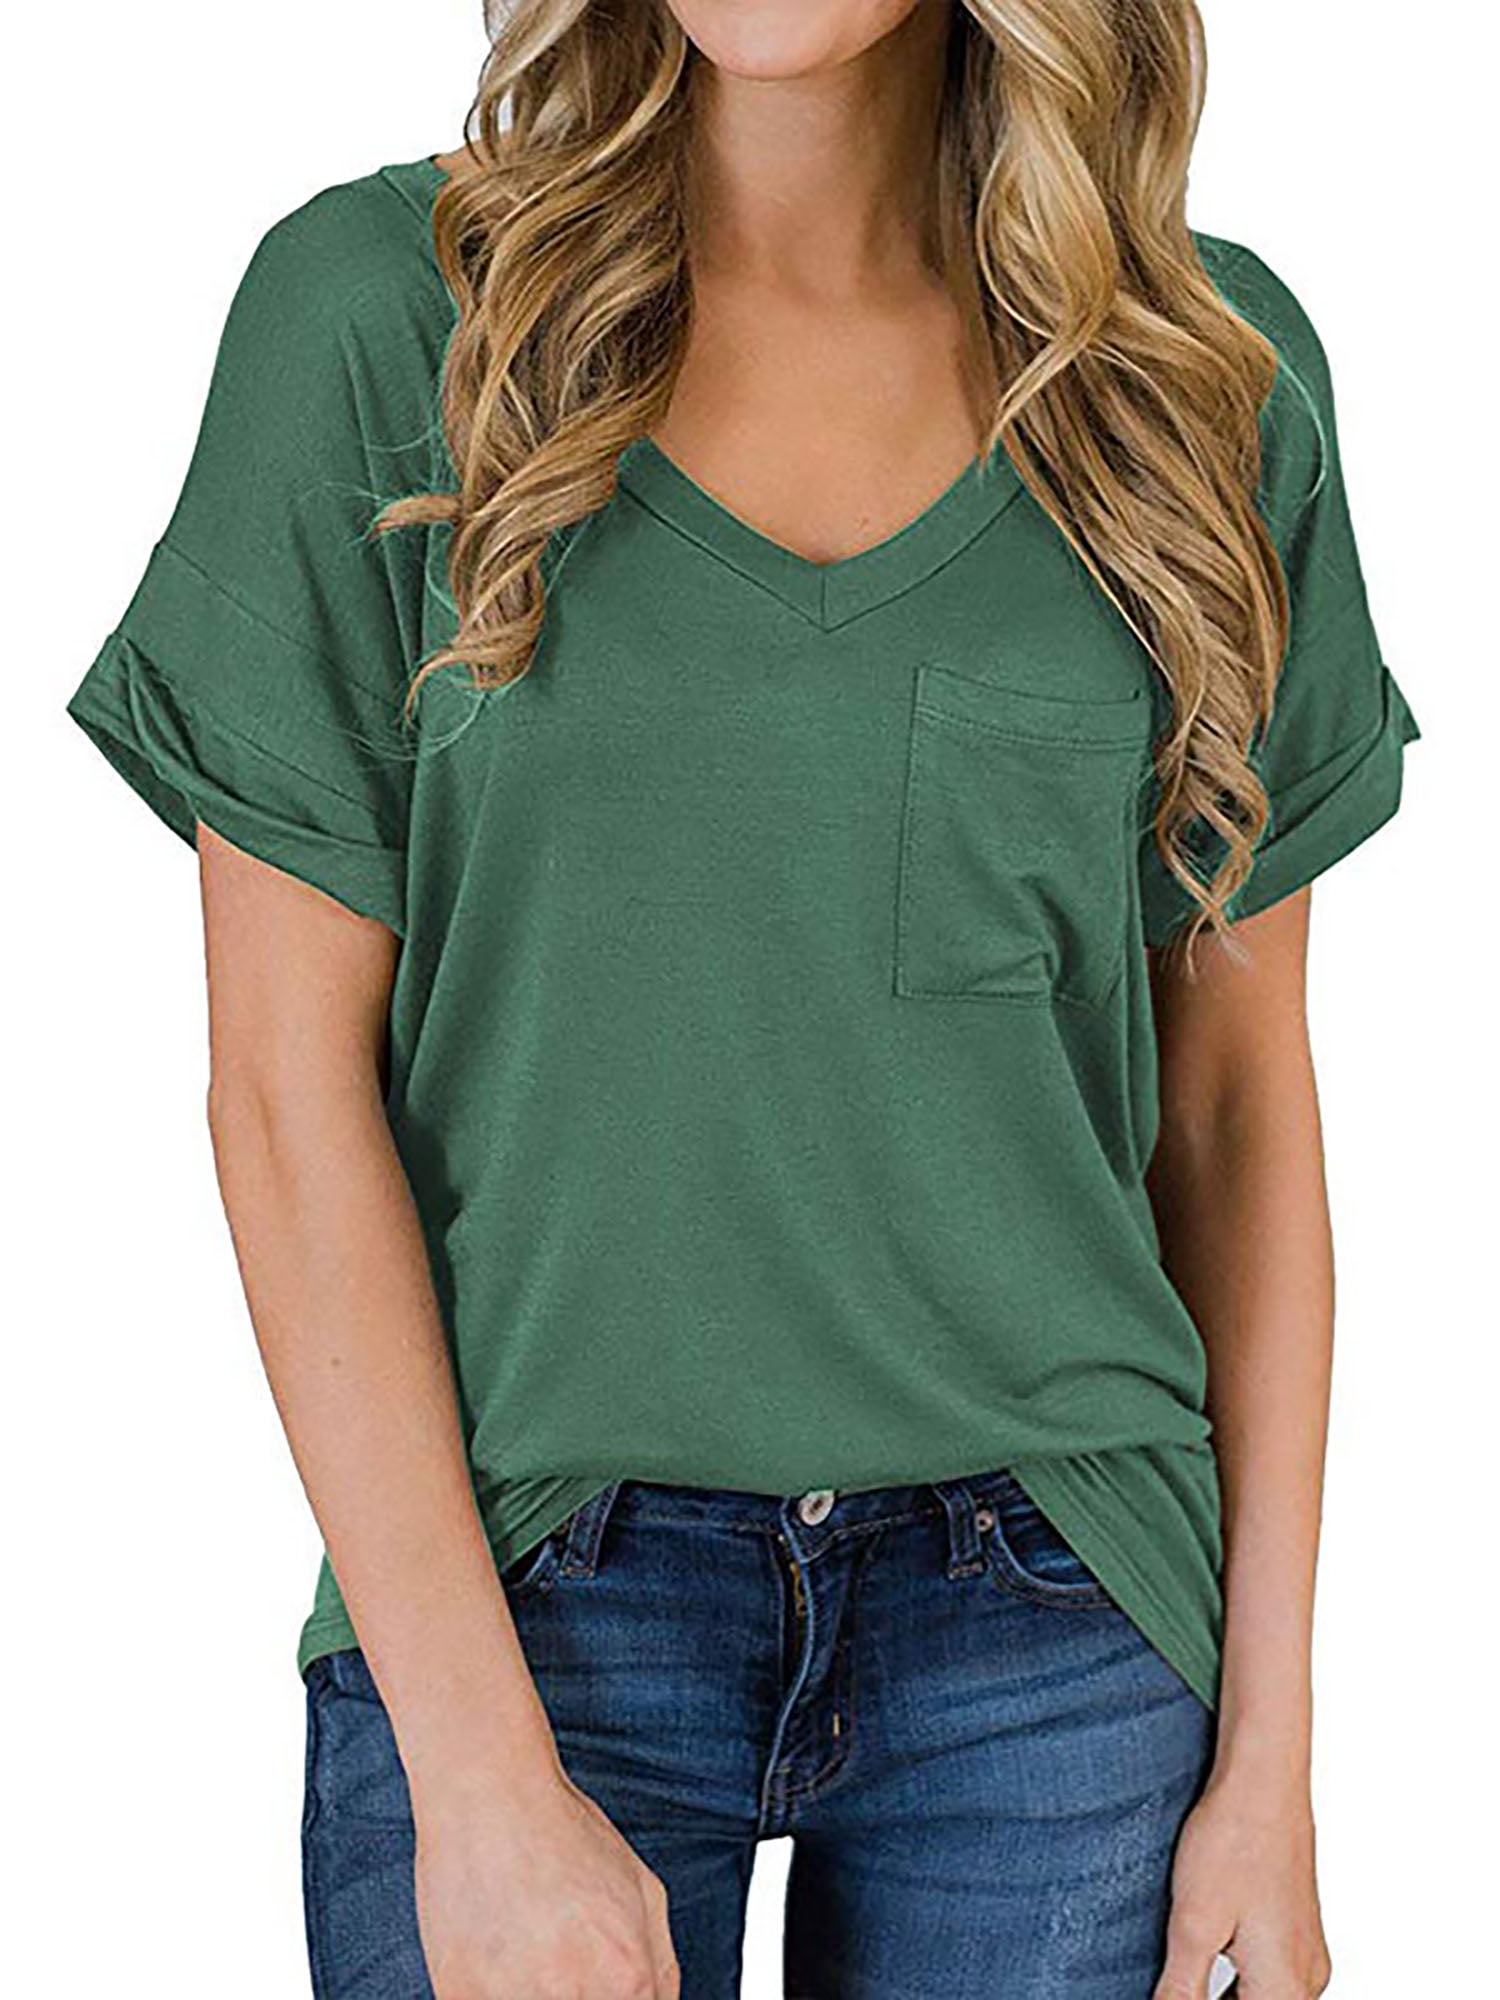 Women's Summer Short Sleeve Blouse T Shirt Tops Casual Loose Tunic Tee Plus Size